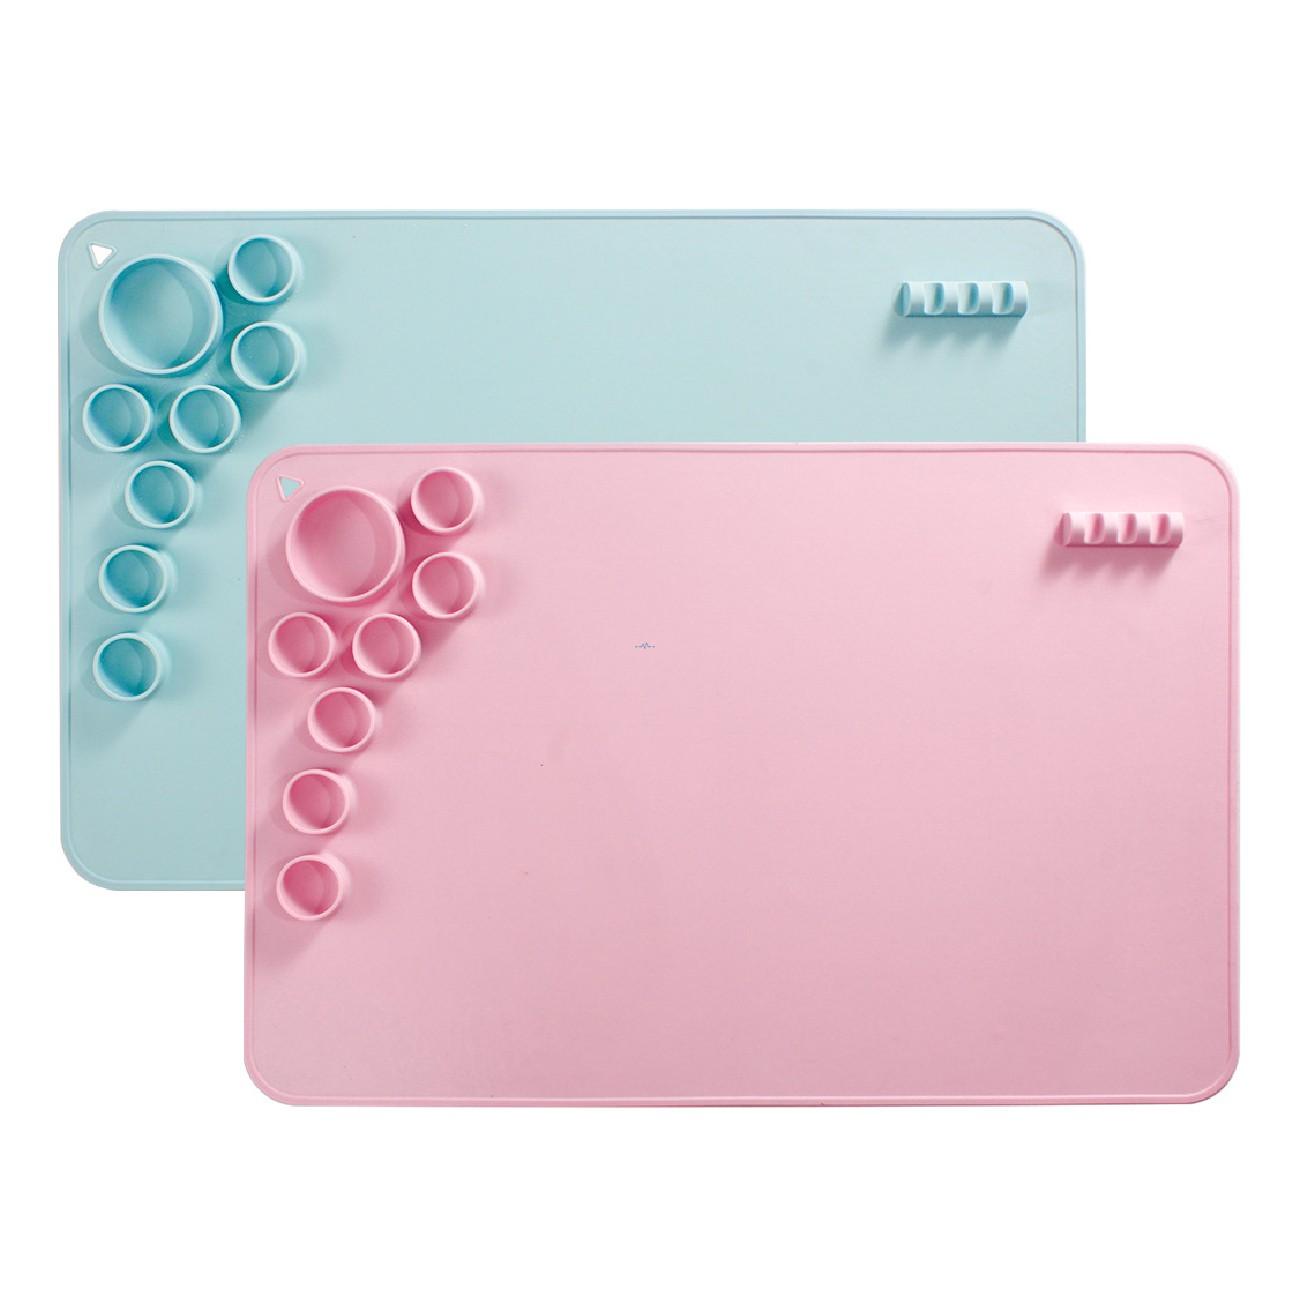 Multi-functional and easy to clean Silicone material drawing pad Silicone painting pad for Kids